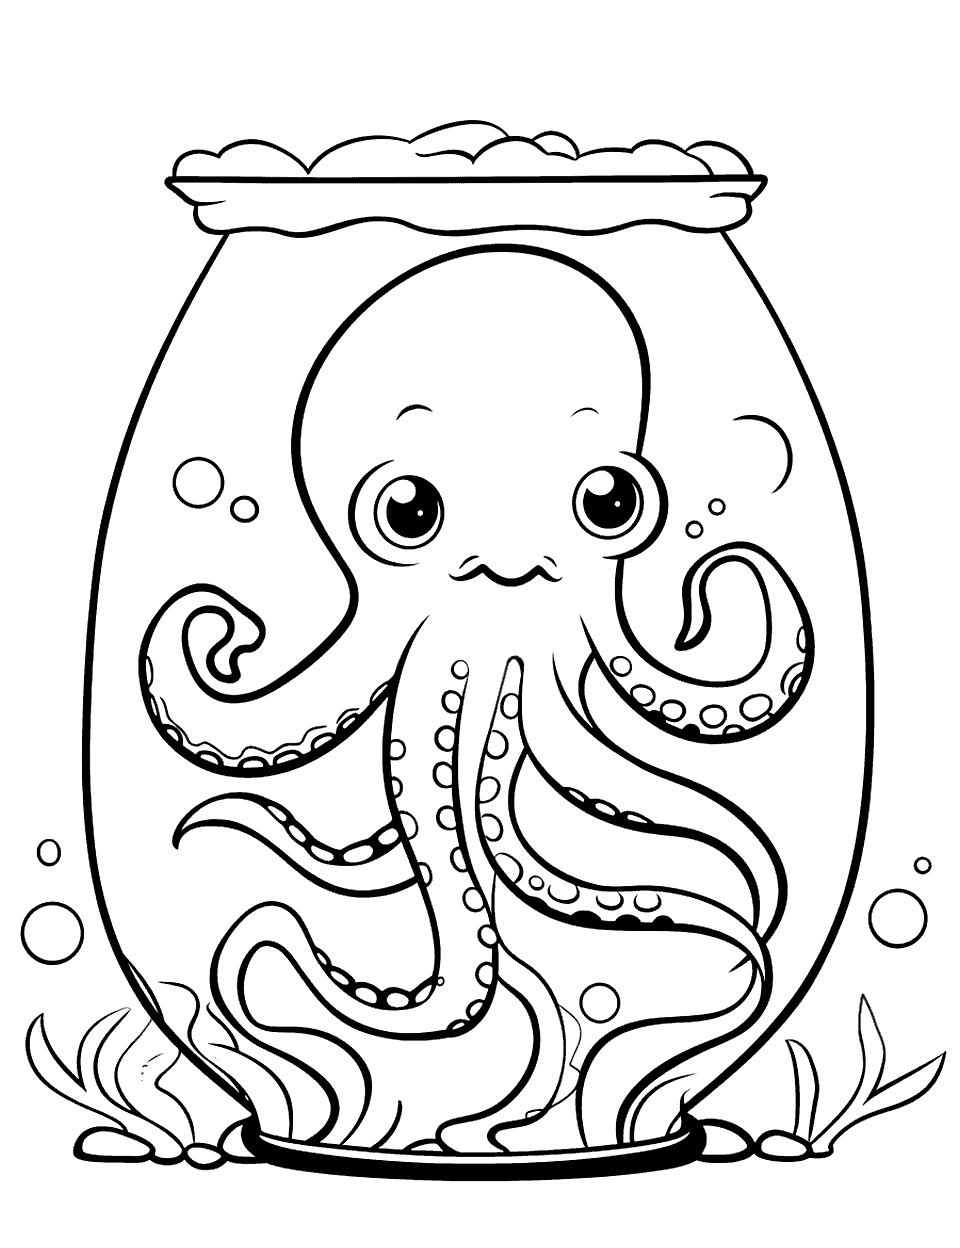 Octopus in a Jar Coloring Page - An octopus inside a jar before getting shipped to an Aquarium.